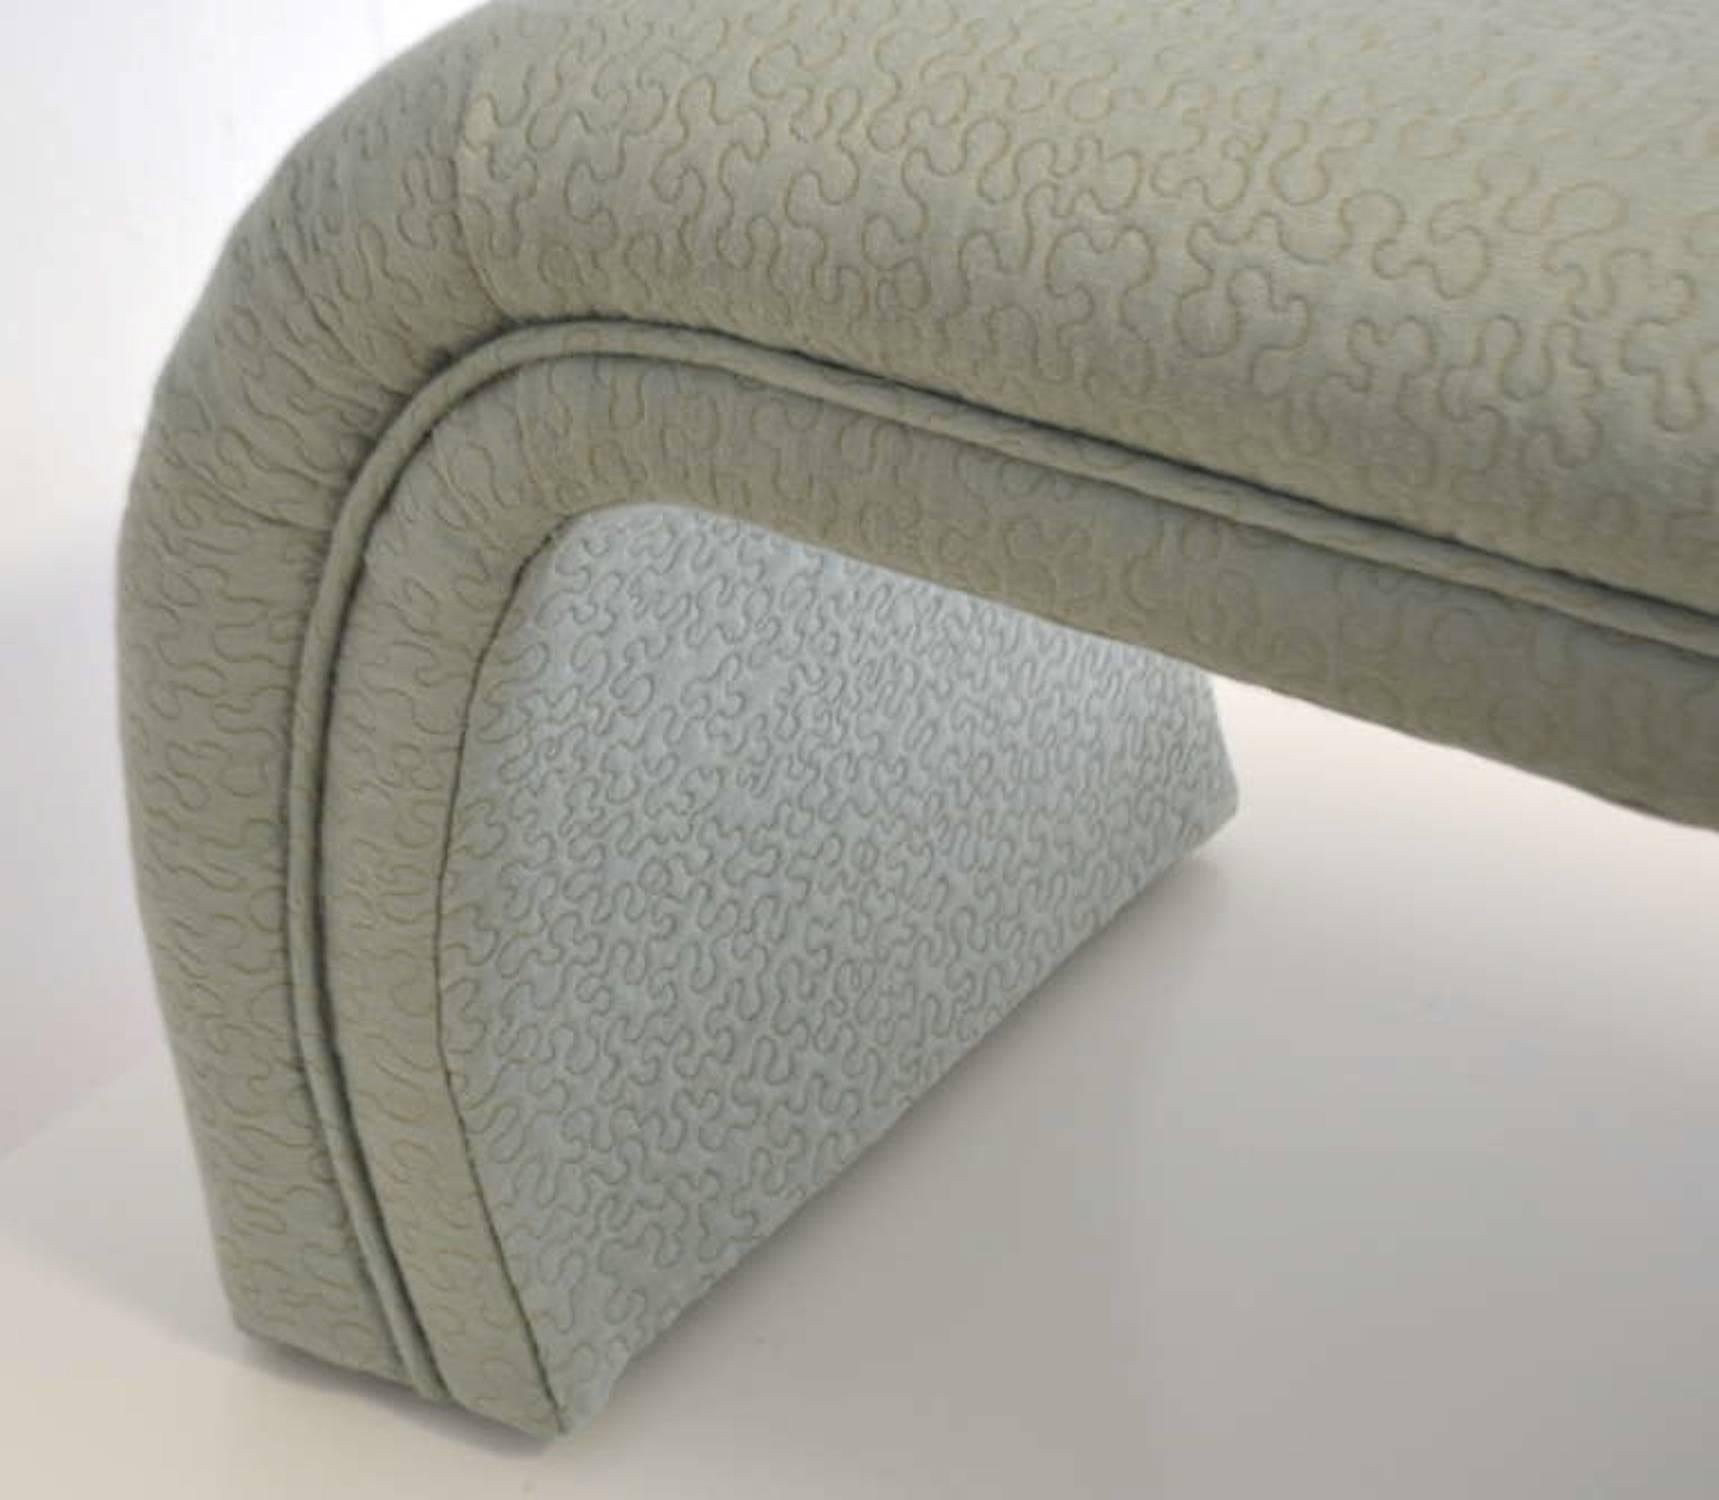 North American Postmodern Upholstered Waterfall Form Bench